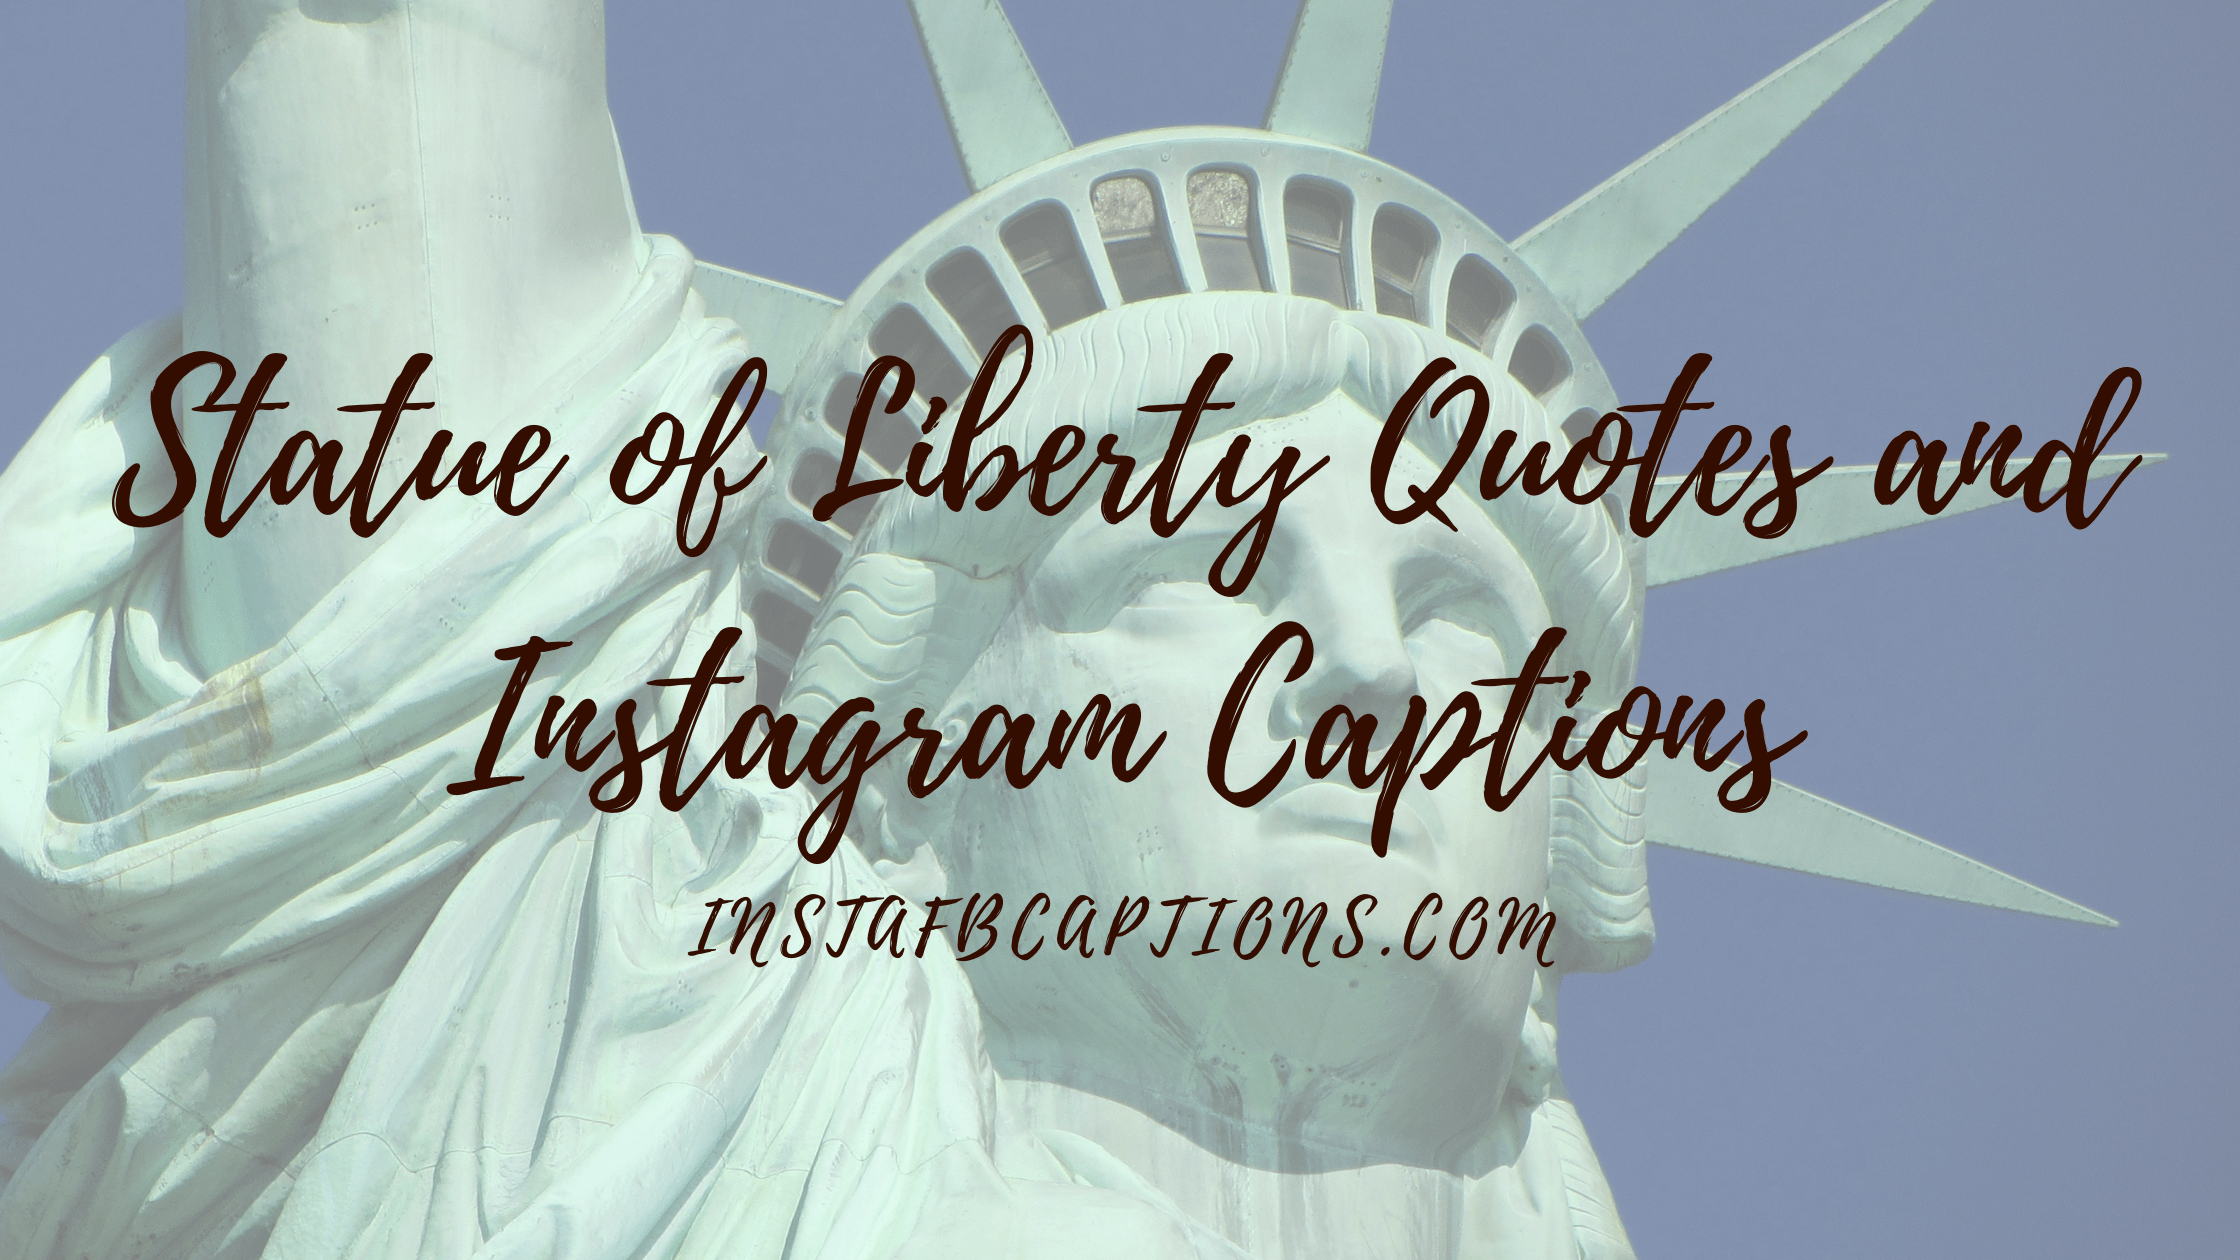 Statue Of Liberty Quotes And Instagram Captions  - Statue of Liberty Quotes and Instagram Captions - 78 Statue of Liberty Instagram Captions in 2023